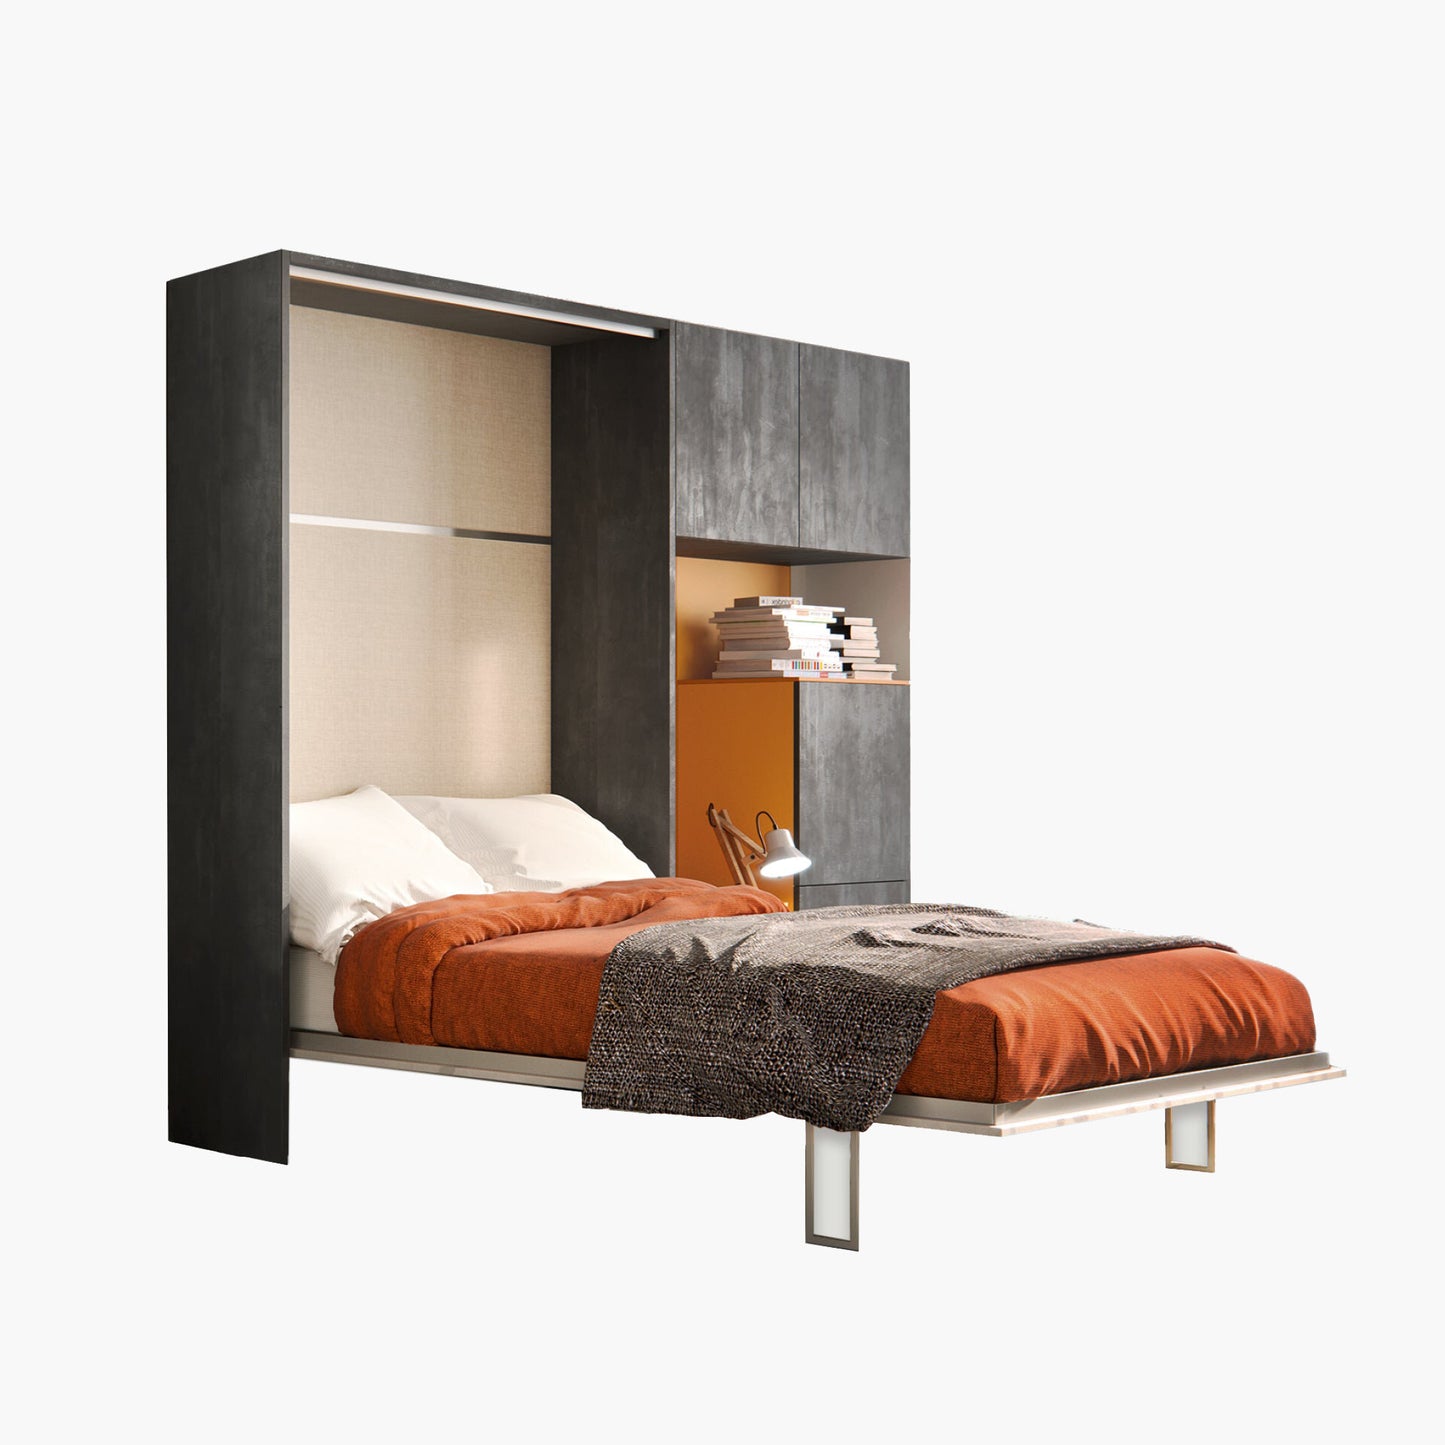 Mobile Letto Biancospino